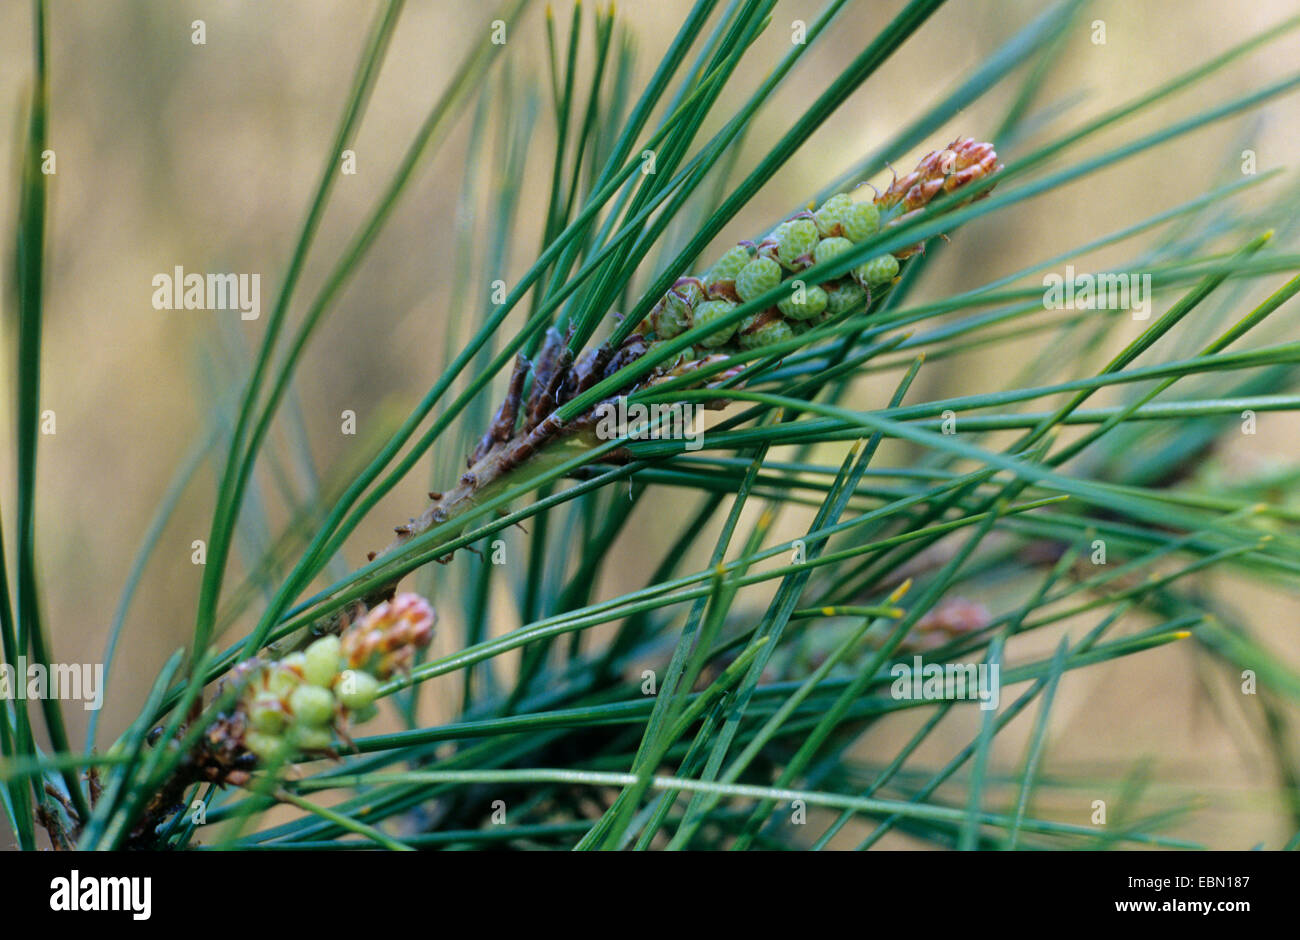 Japanese red pine (Pinus densiflora), branch with male flowers Stock Photo